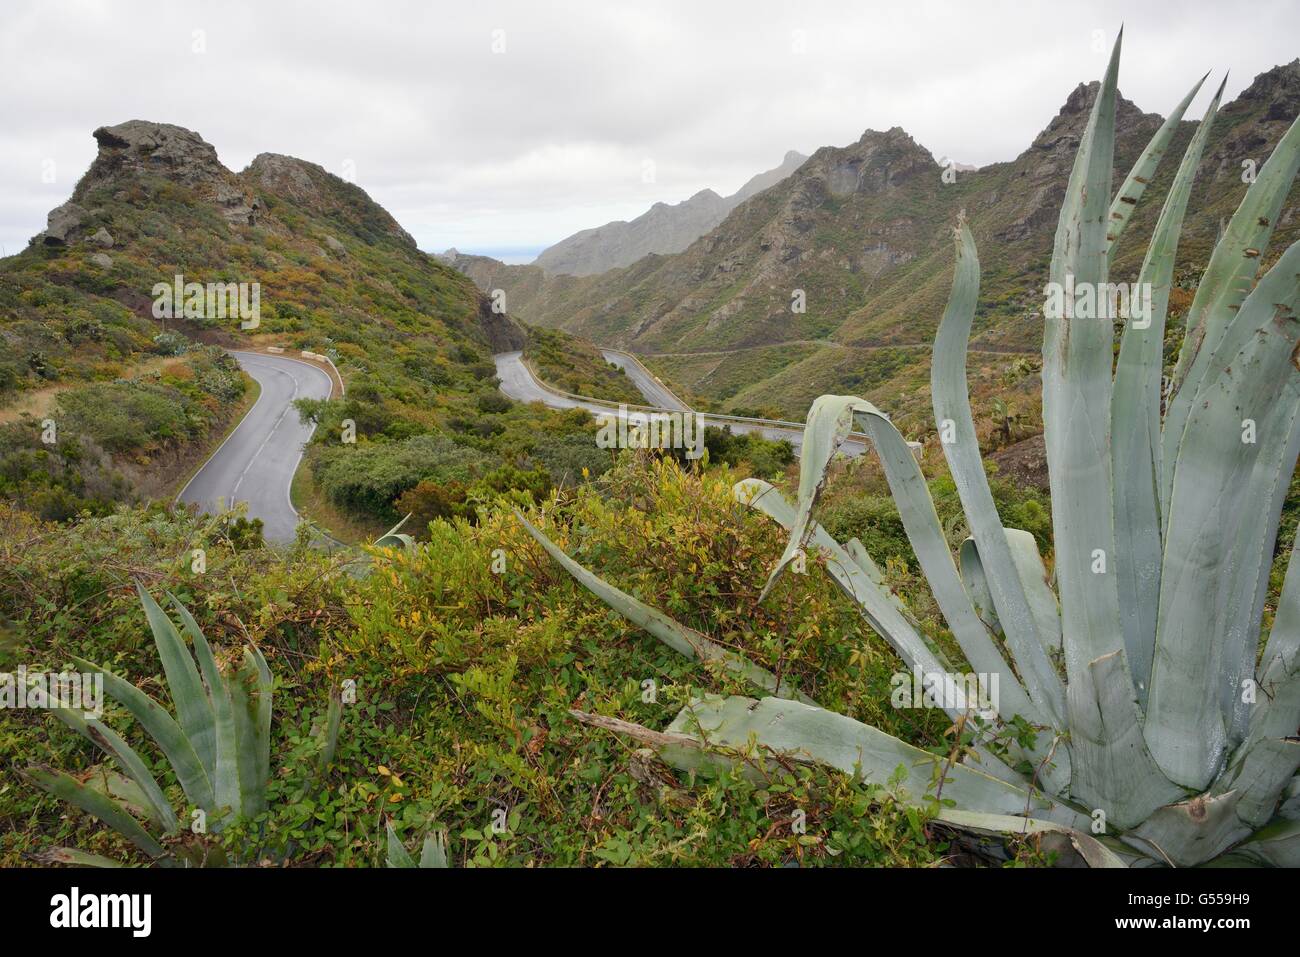 Winding road with hairpin bends in the lush, cloud-shrouded Anaga mountains, flanked with dense vegatation, Tenerife. Stock Photo